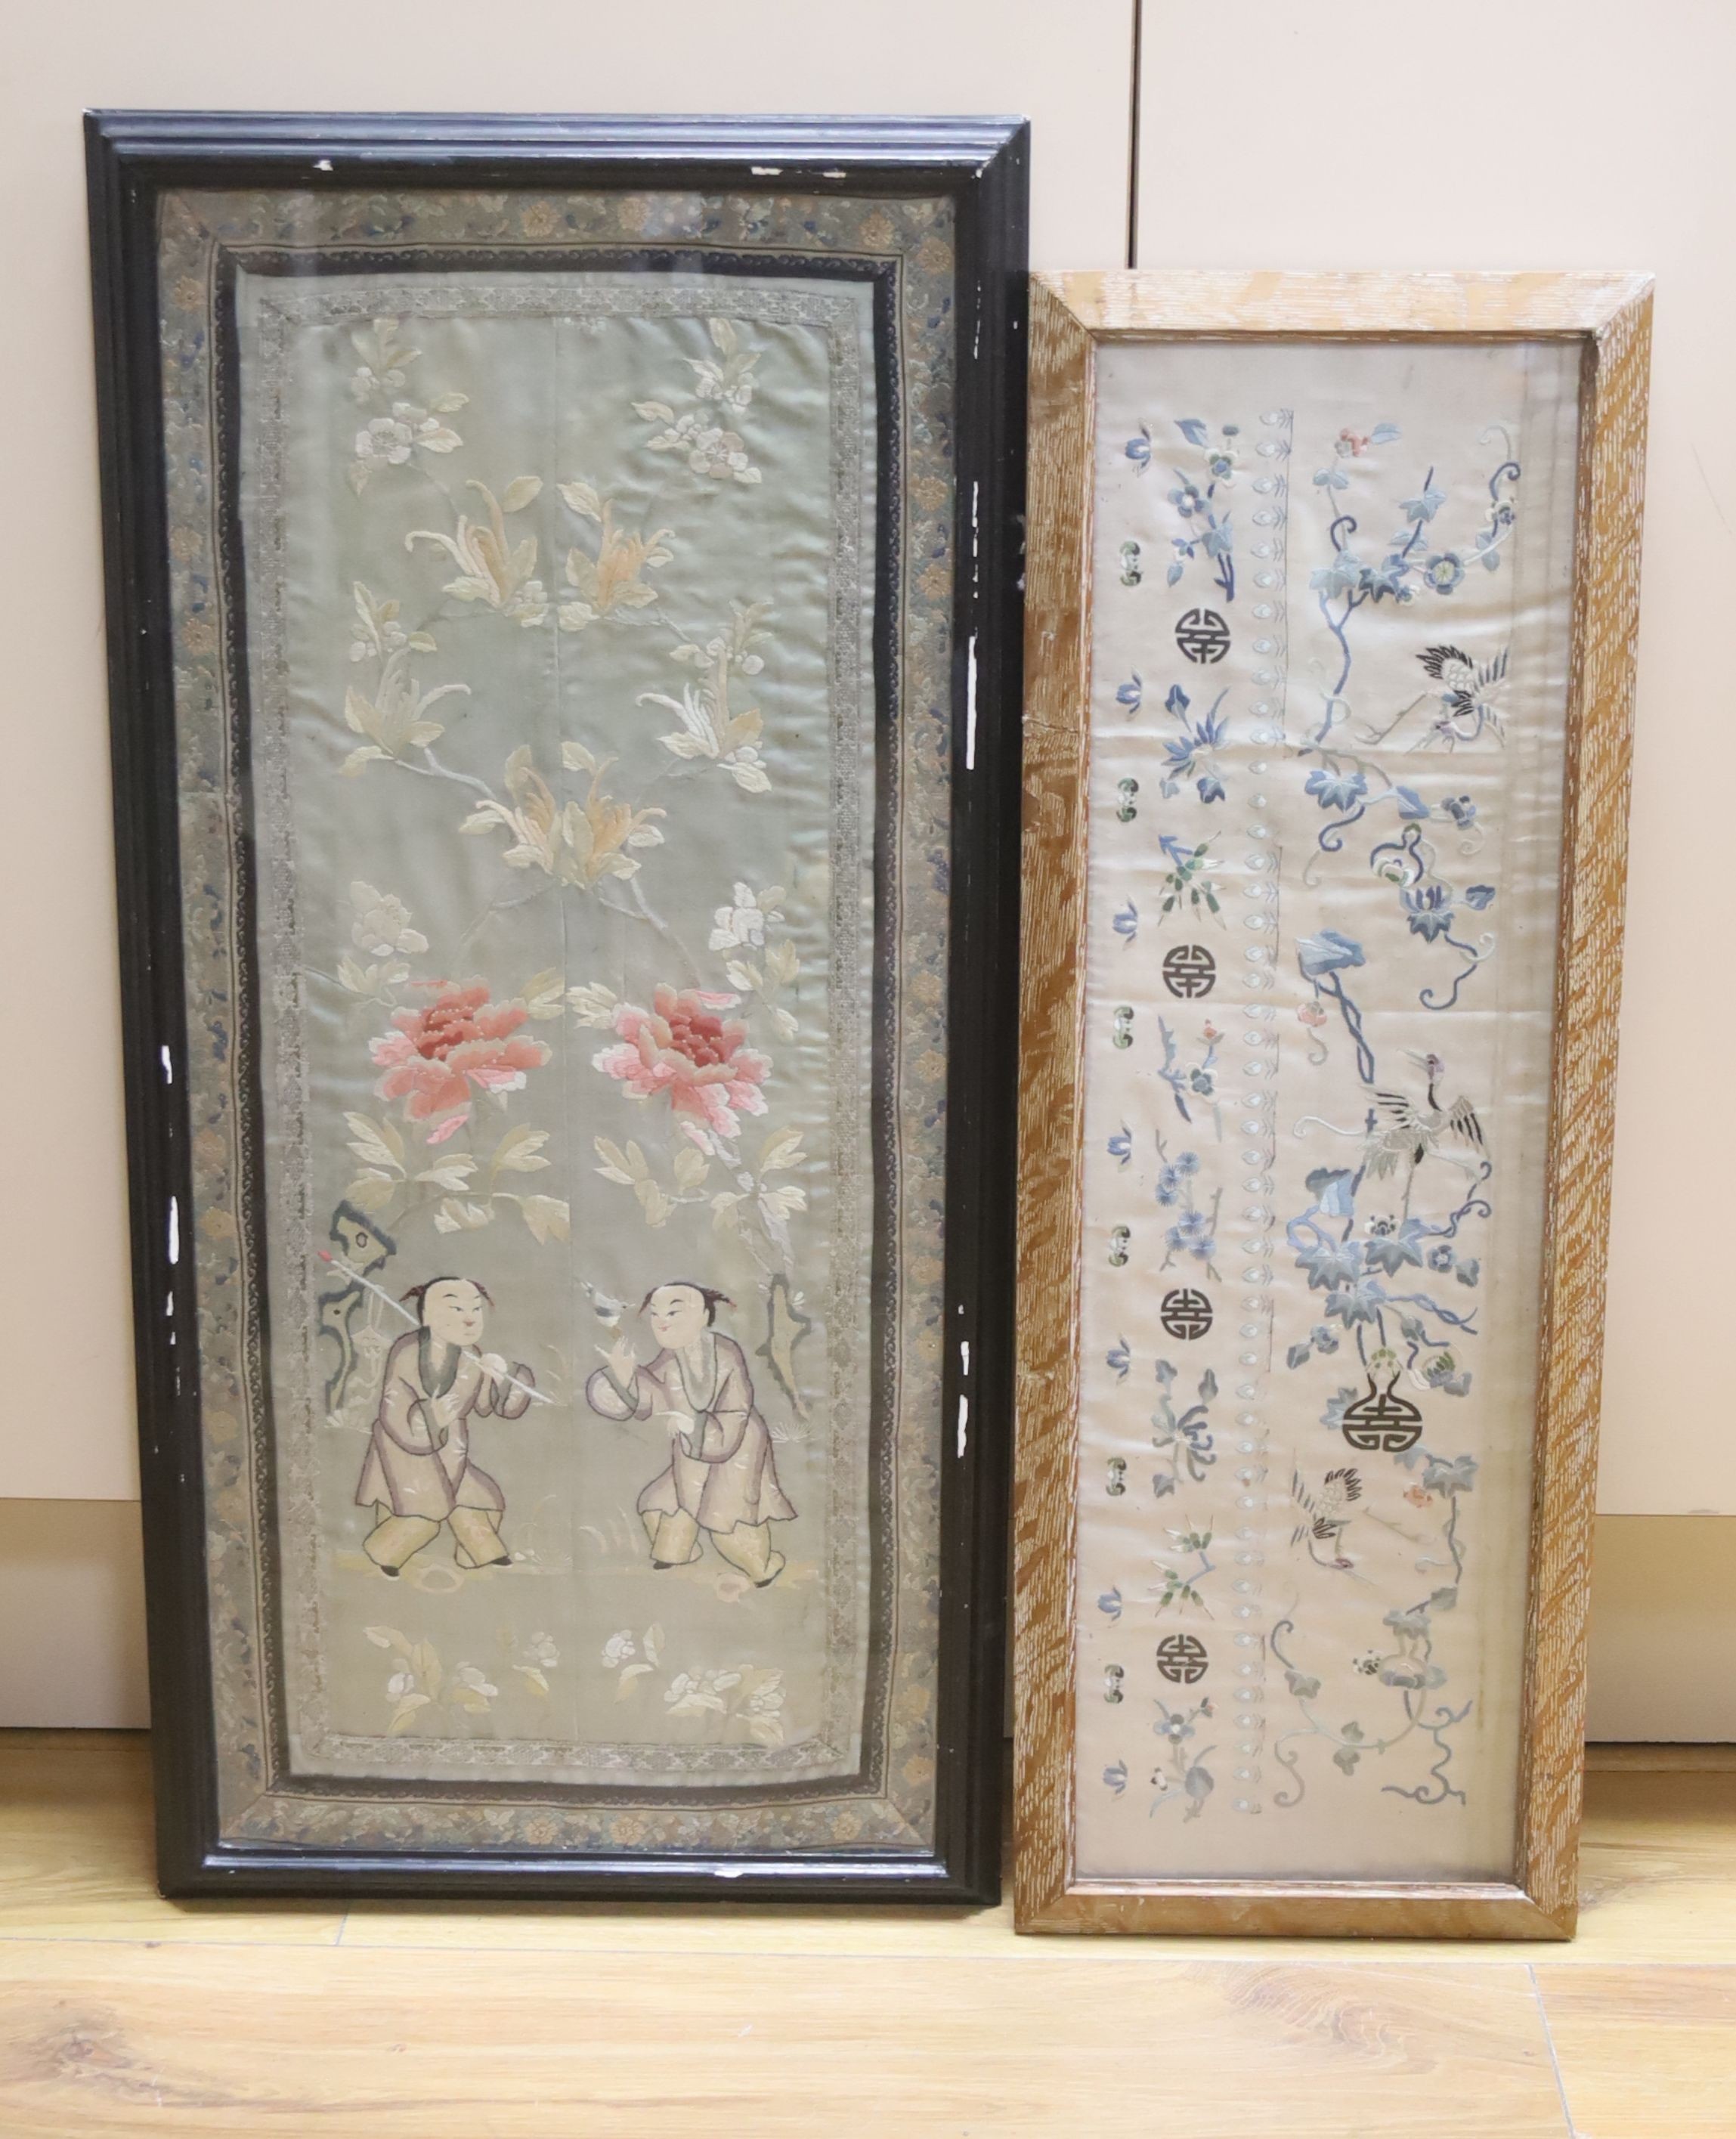 A Chinese embroidered sleeve band and a pair of embroidered sleeve bands (in one frame), largest 64 x 28cm